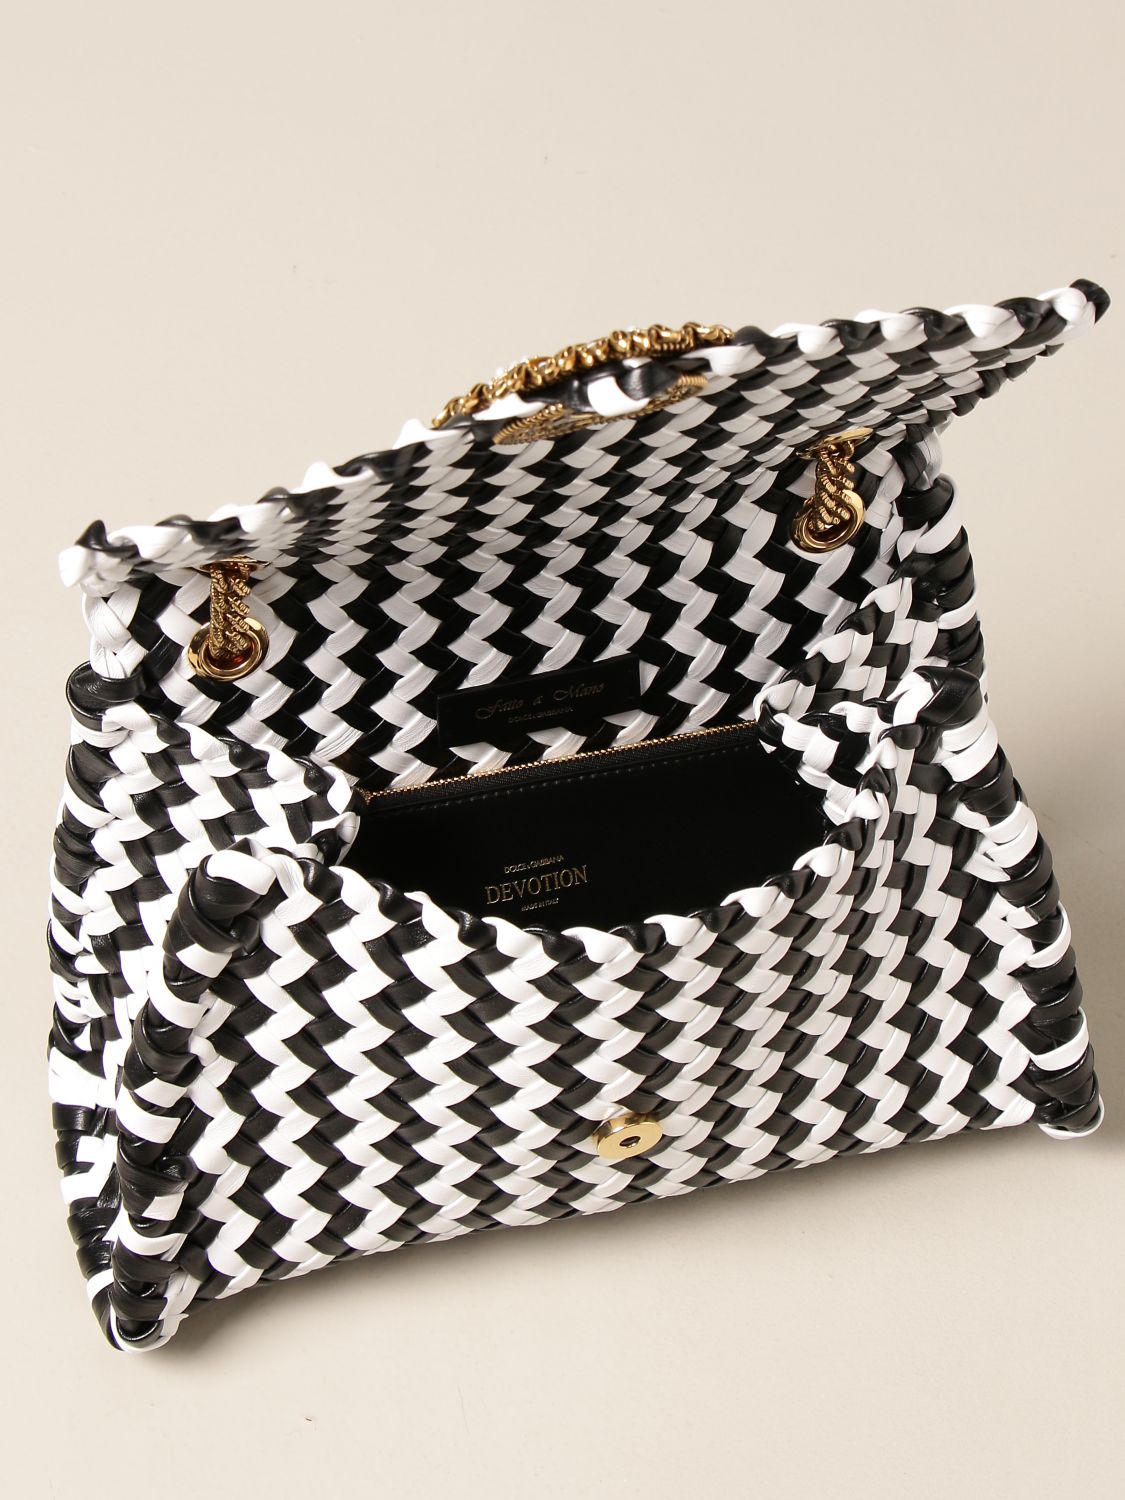 Dolce & Gabbana Devotion bag in two-tone woven leather